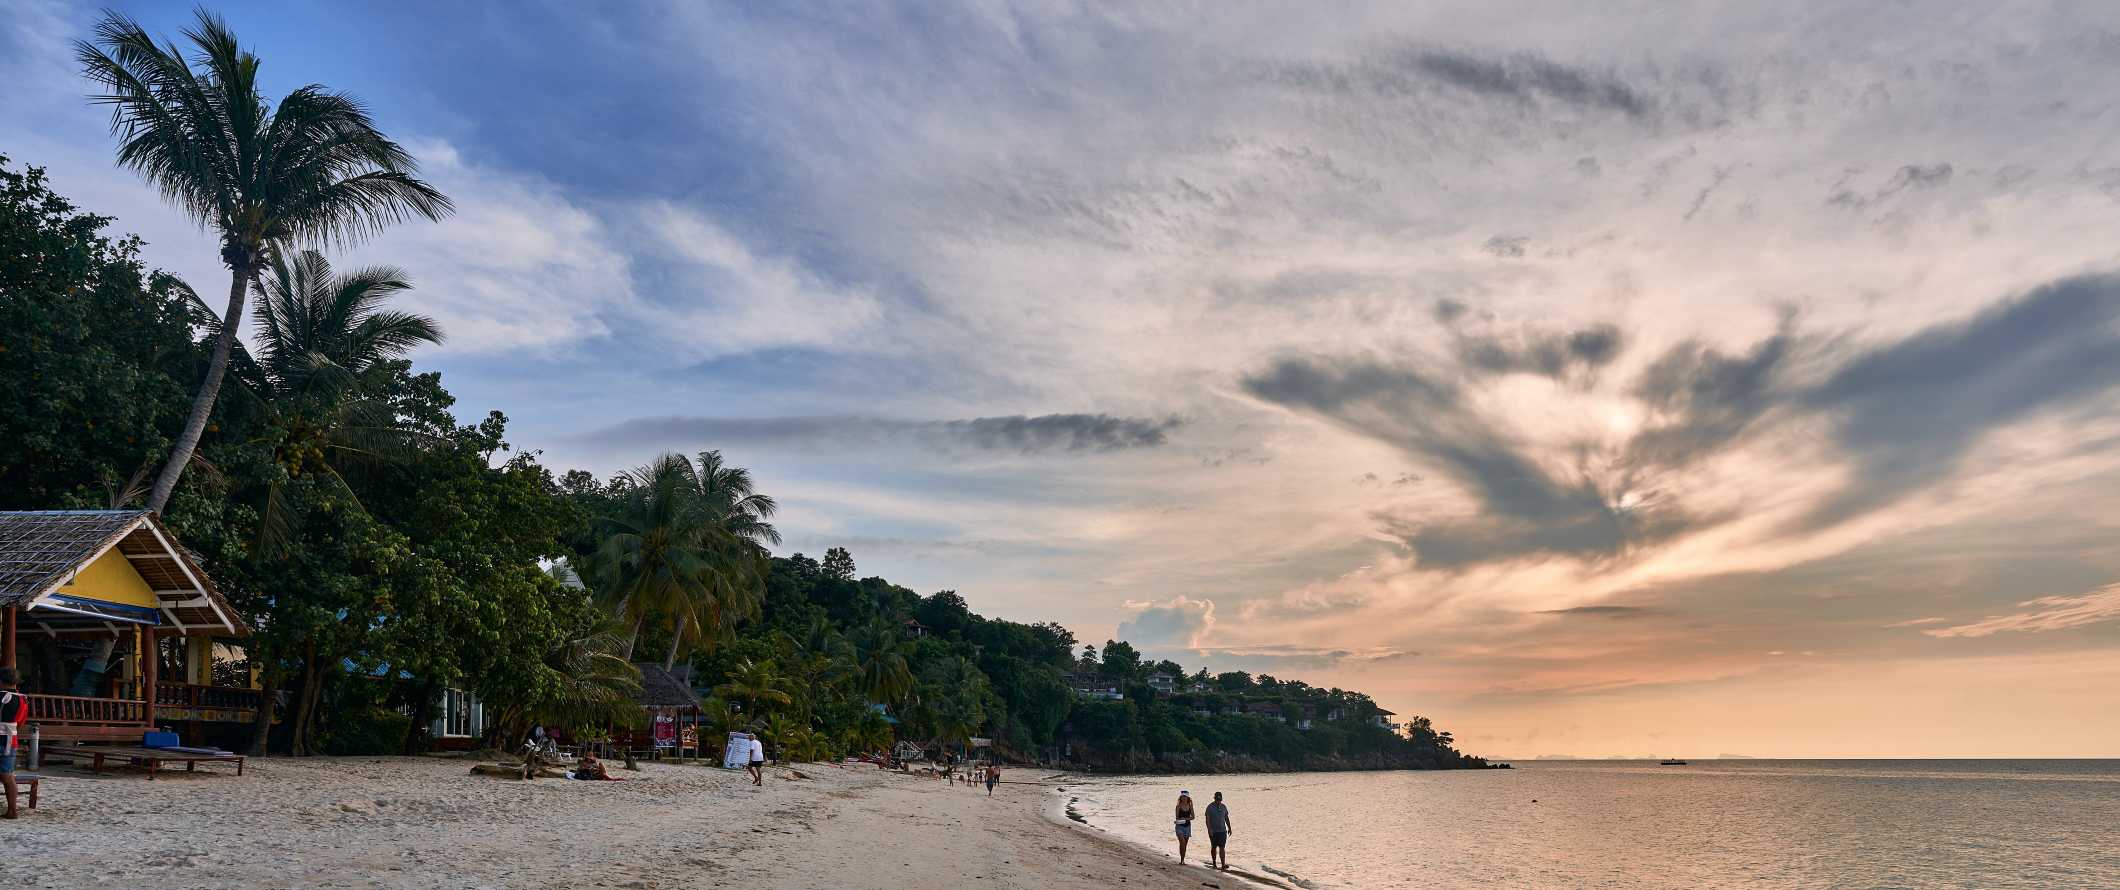 People walking along a beach at sunset on the island of Ko Pha Ngan, Thailand at sunset over the ocean